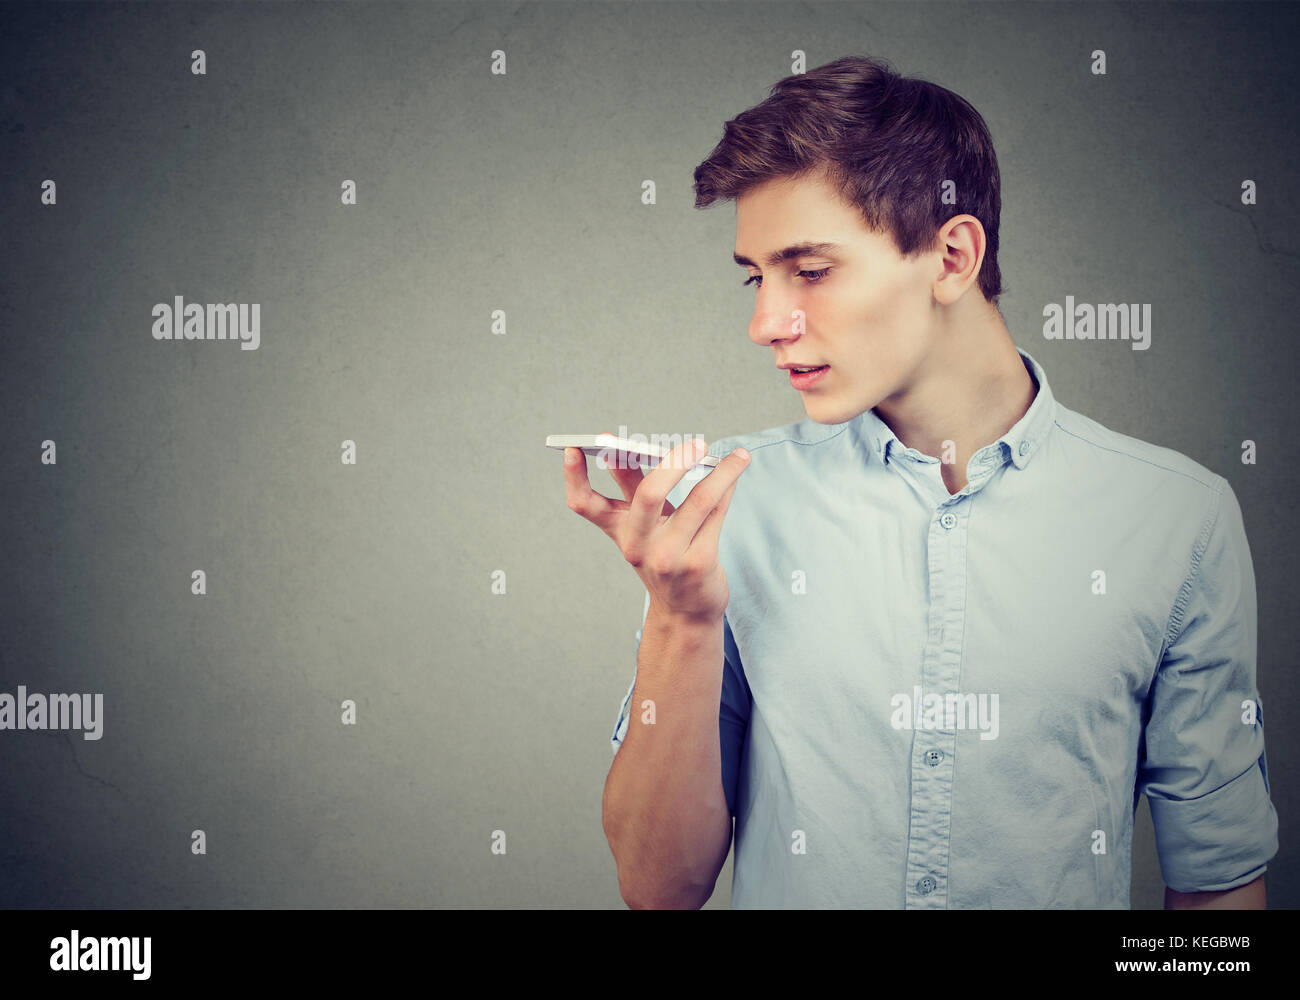 Young man using a smart phone voice recognition function isolated on gray wall background Stock Photo